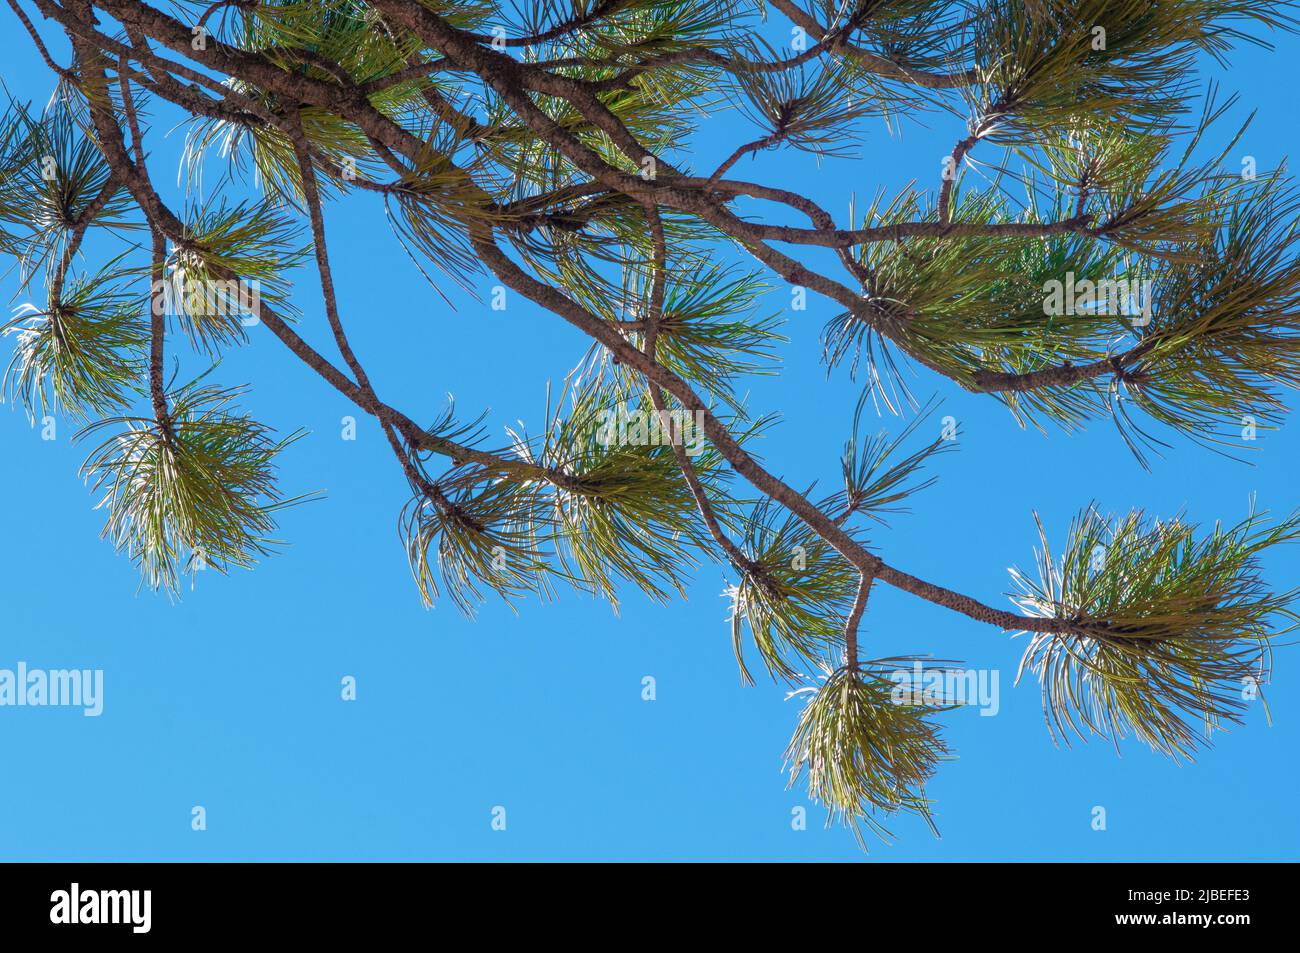 Conifer tree branches and needles Stock Photo